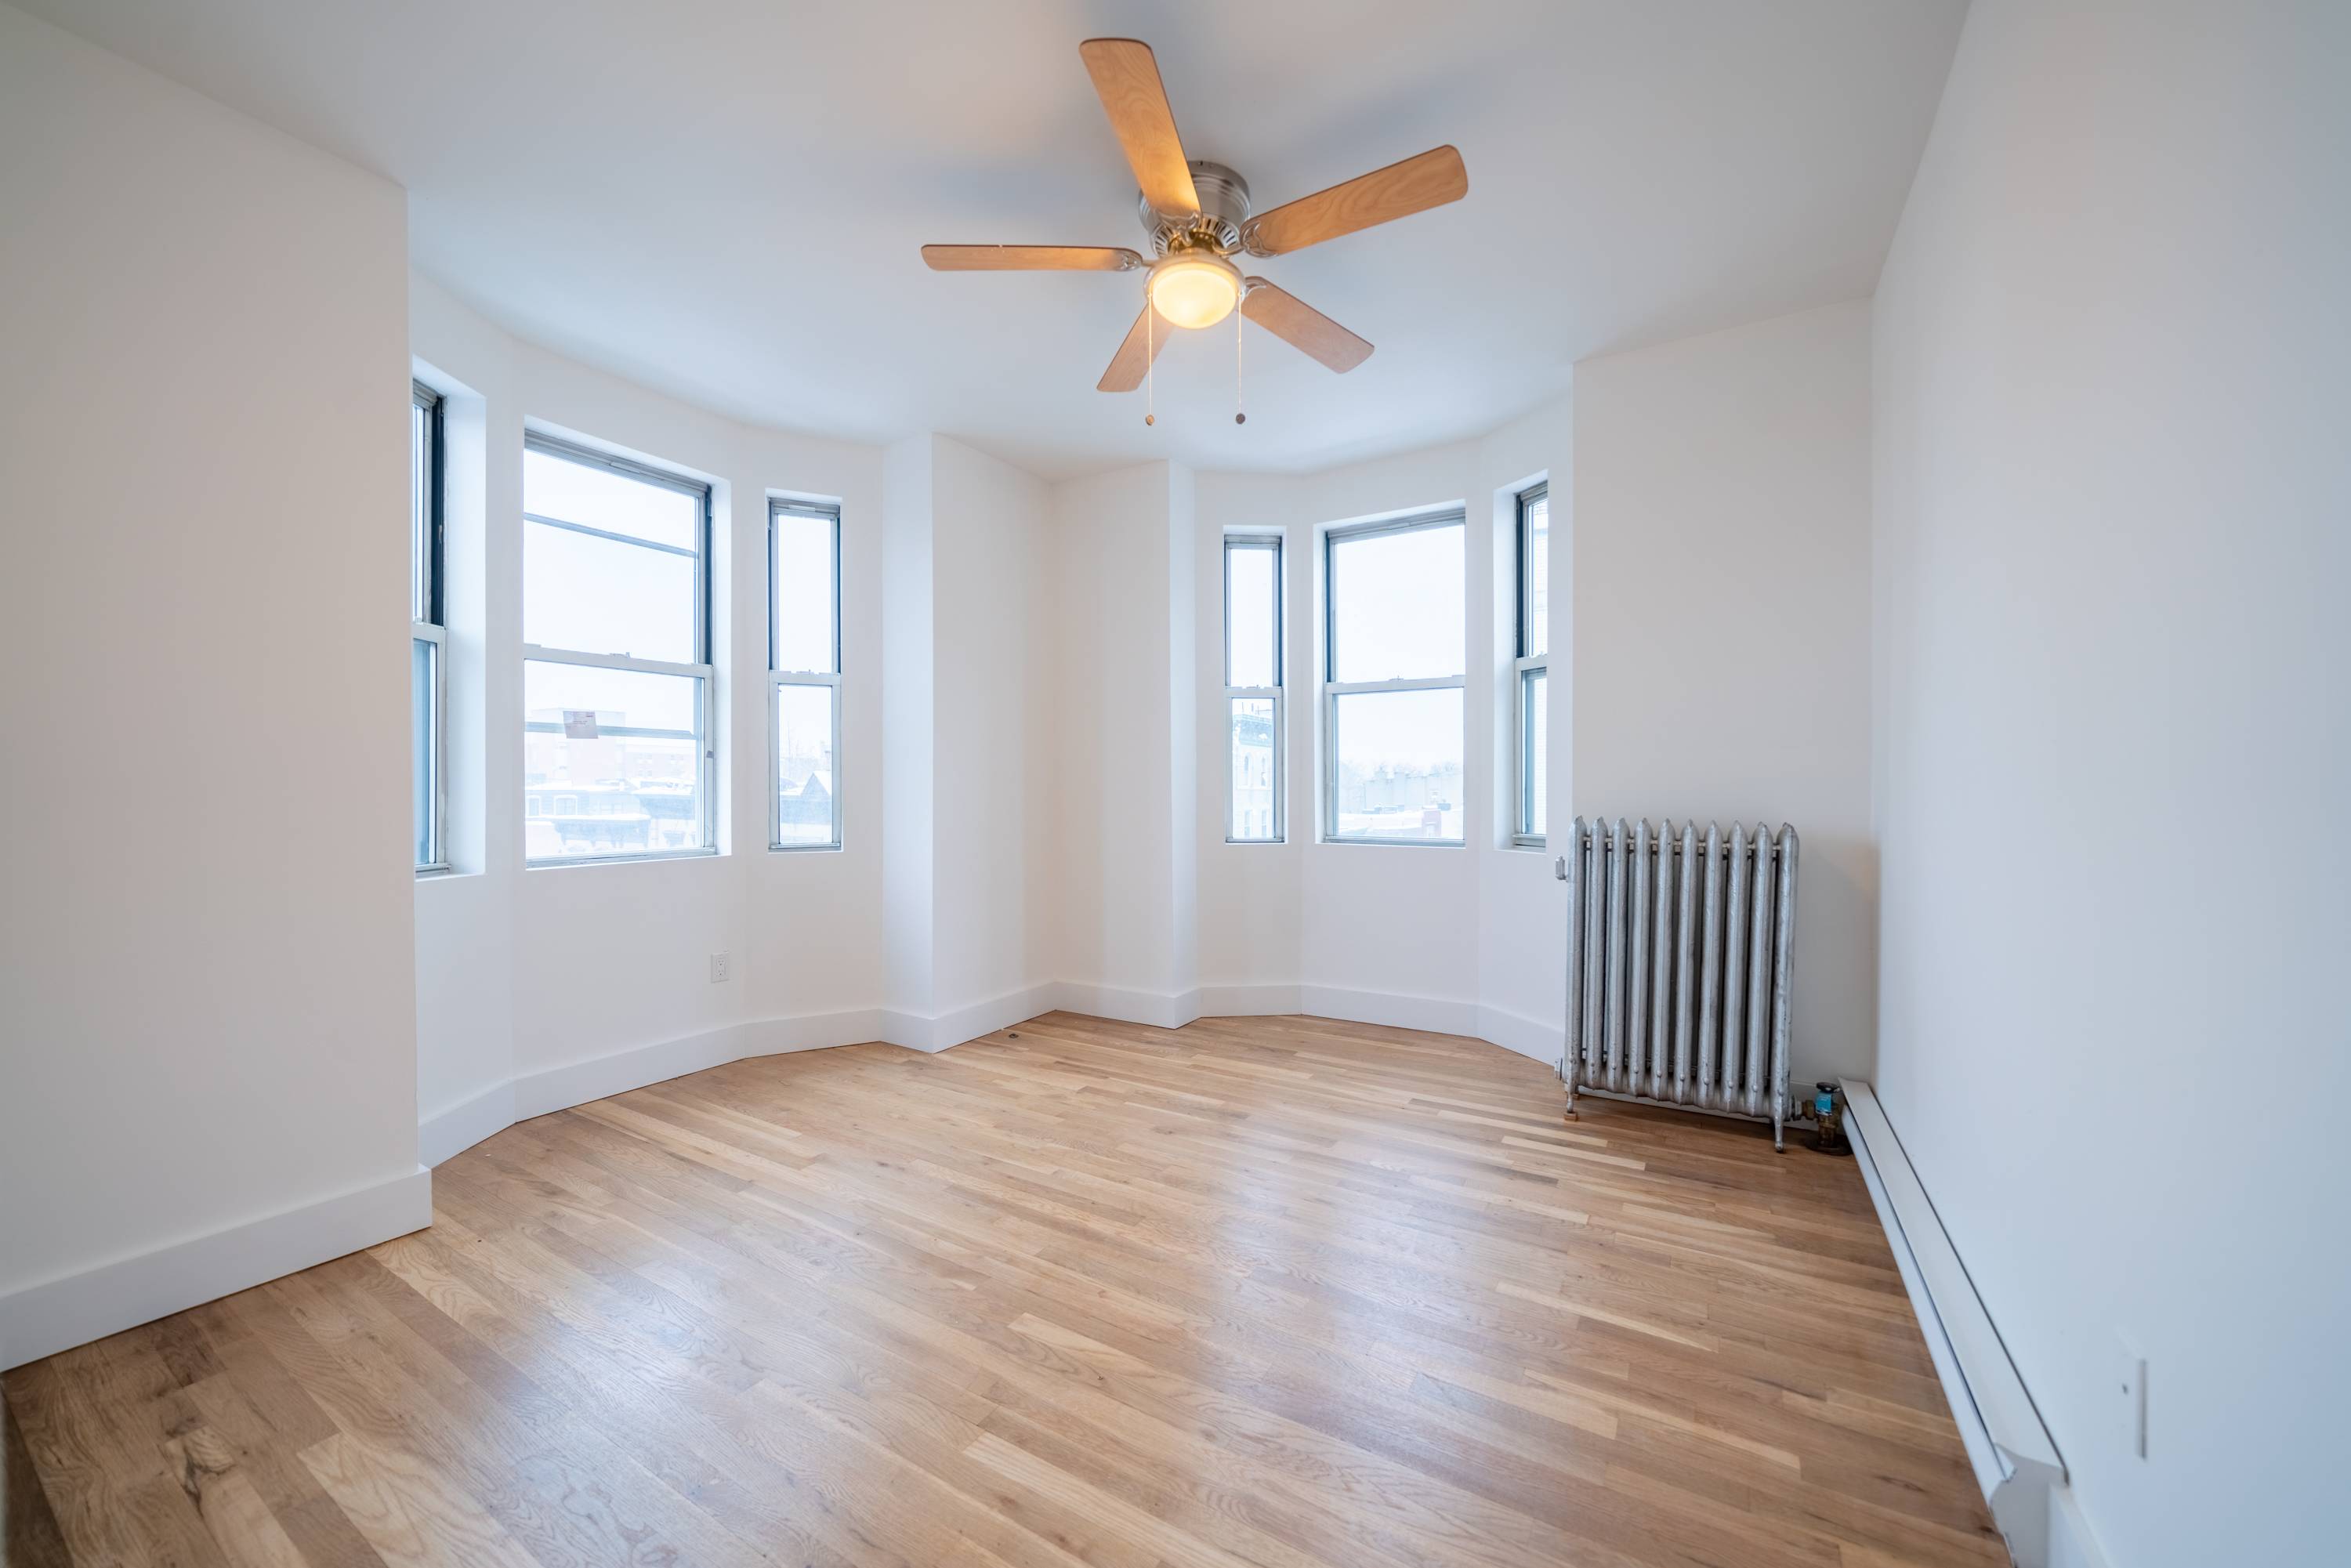 Newly Renovated 2 Bedroom 1 Bath Apartment located at 163 3rd Street in Downtown Hoboken.  Laundry On Site.